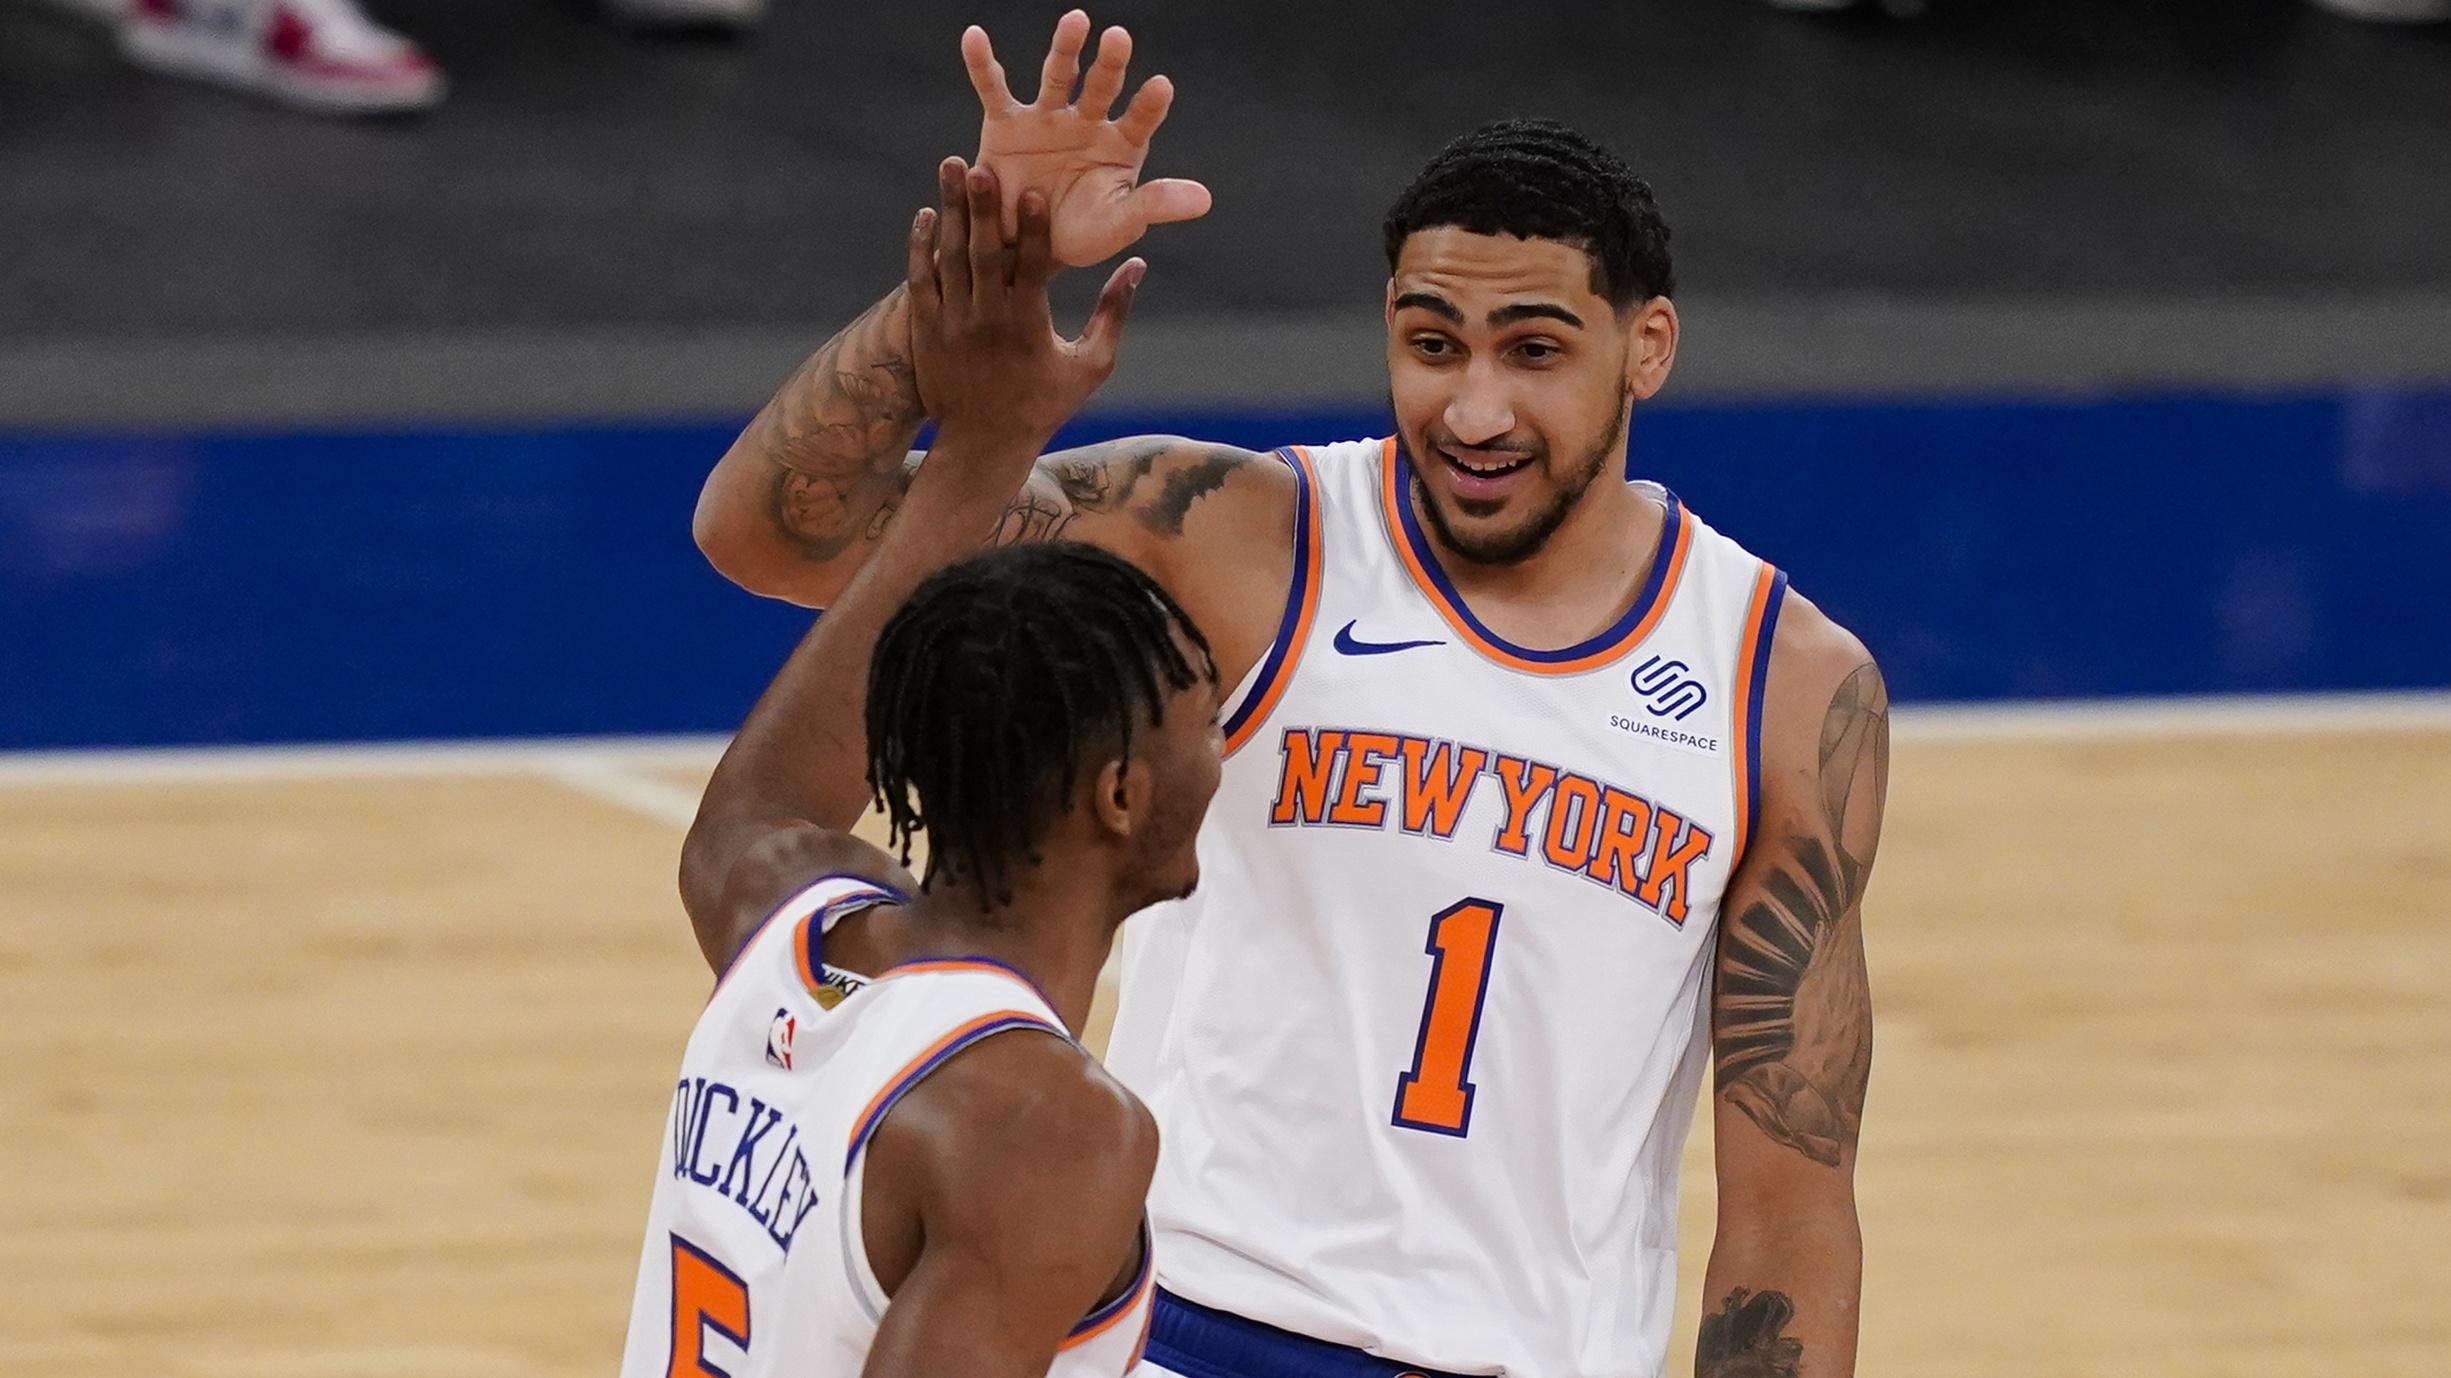 Feb 25, 2021; New York, New York, USA; New York Knicks guard Immanuel Quickley (5) celebrates with forward Obi Toppin (1) after scoring against the Sacramento Kings in the first half at Madison Square Garden. / © POOL PHOTOS-USA TODAY Sports